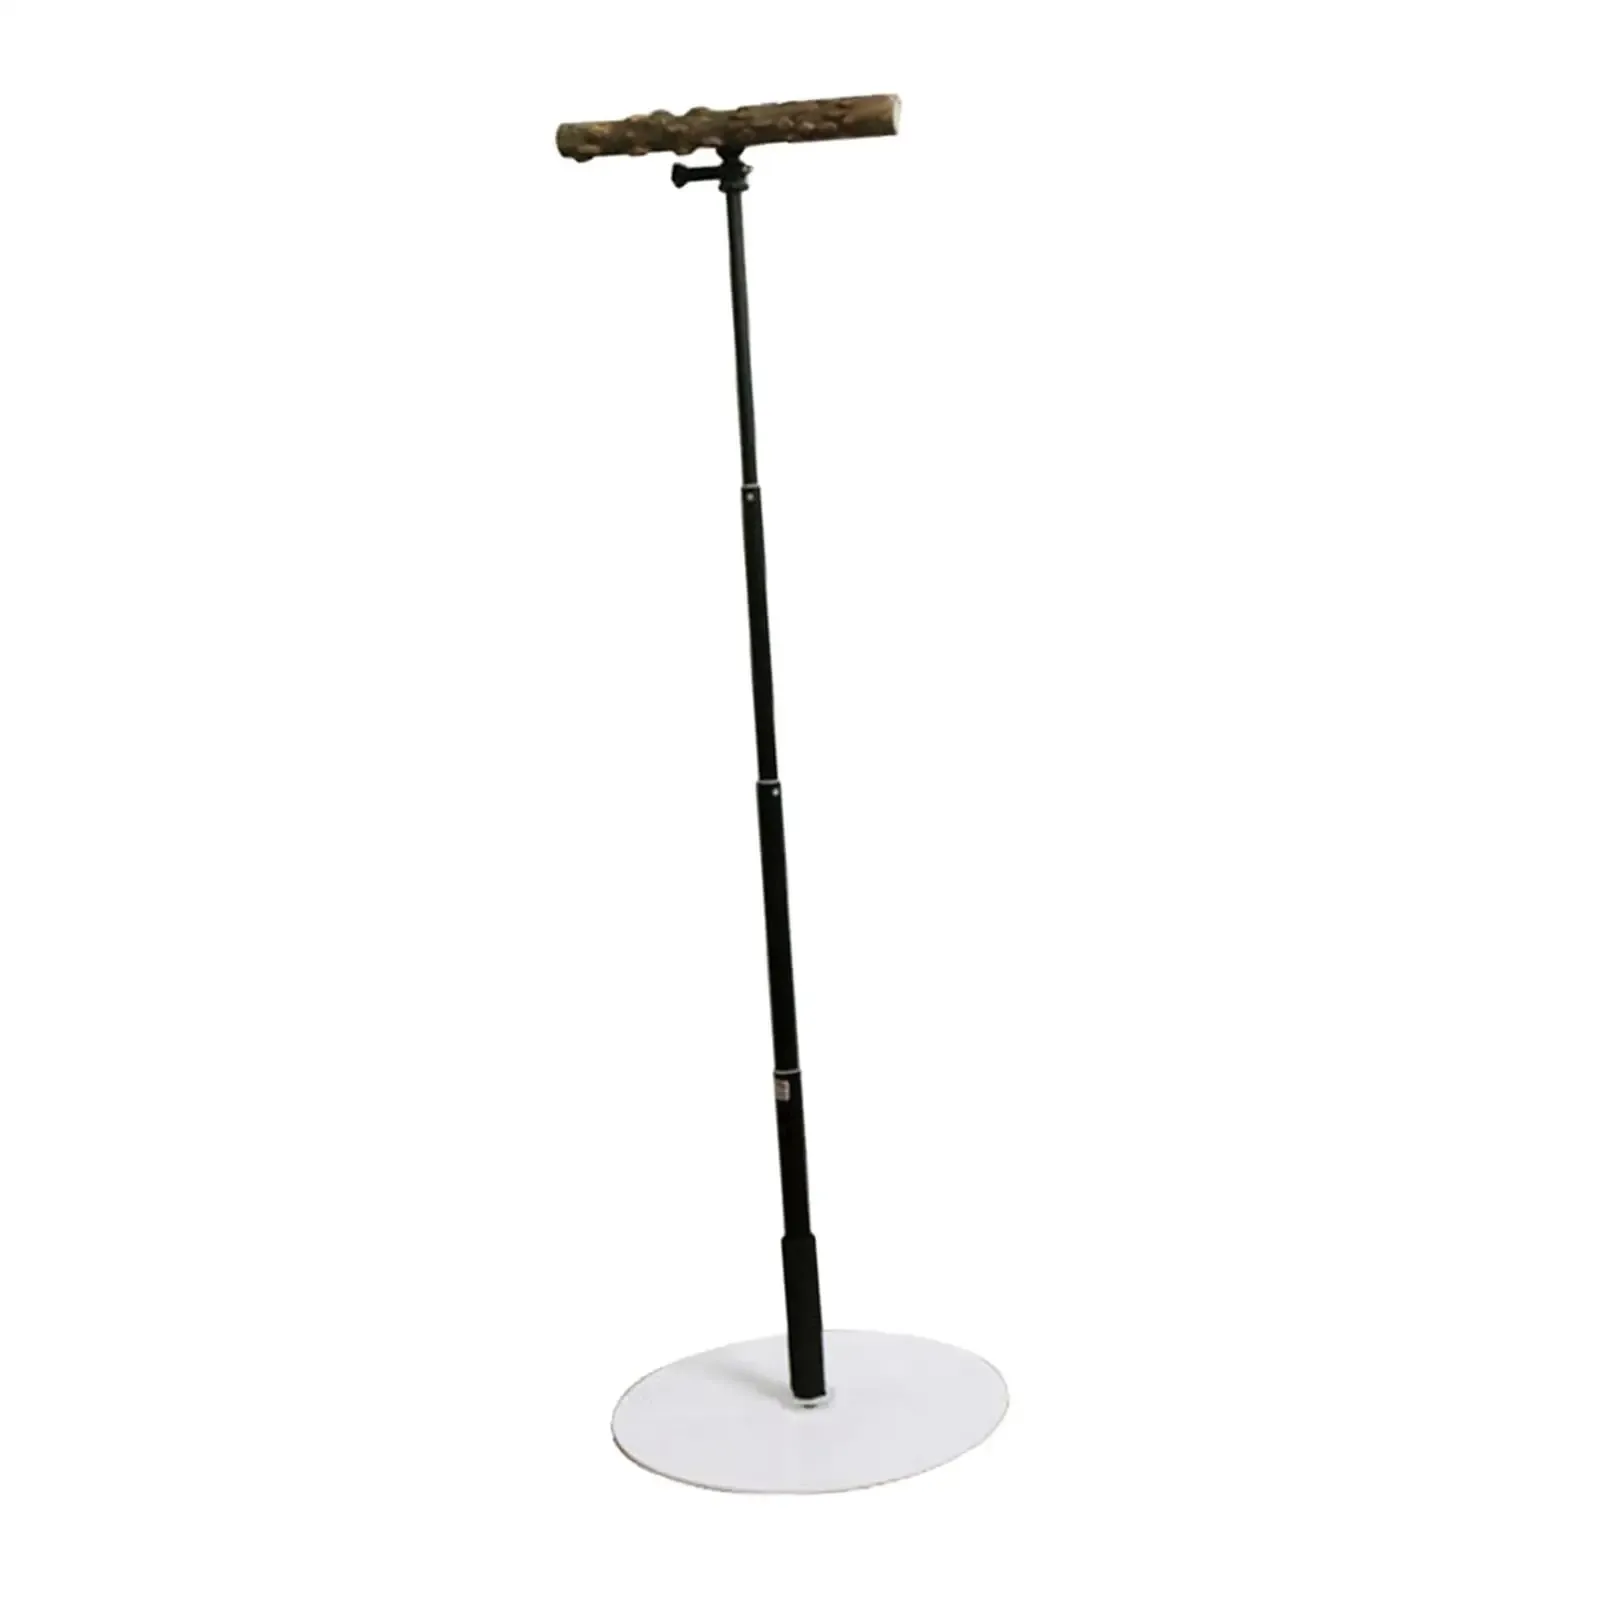 T Stand Parrot Training Playstand with Base Bird Perch for Finch Parakeet